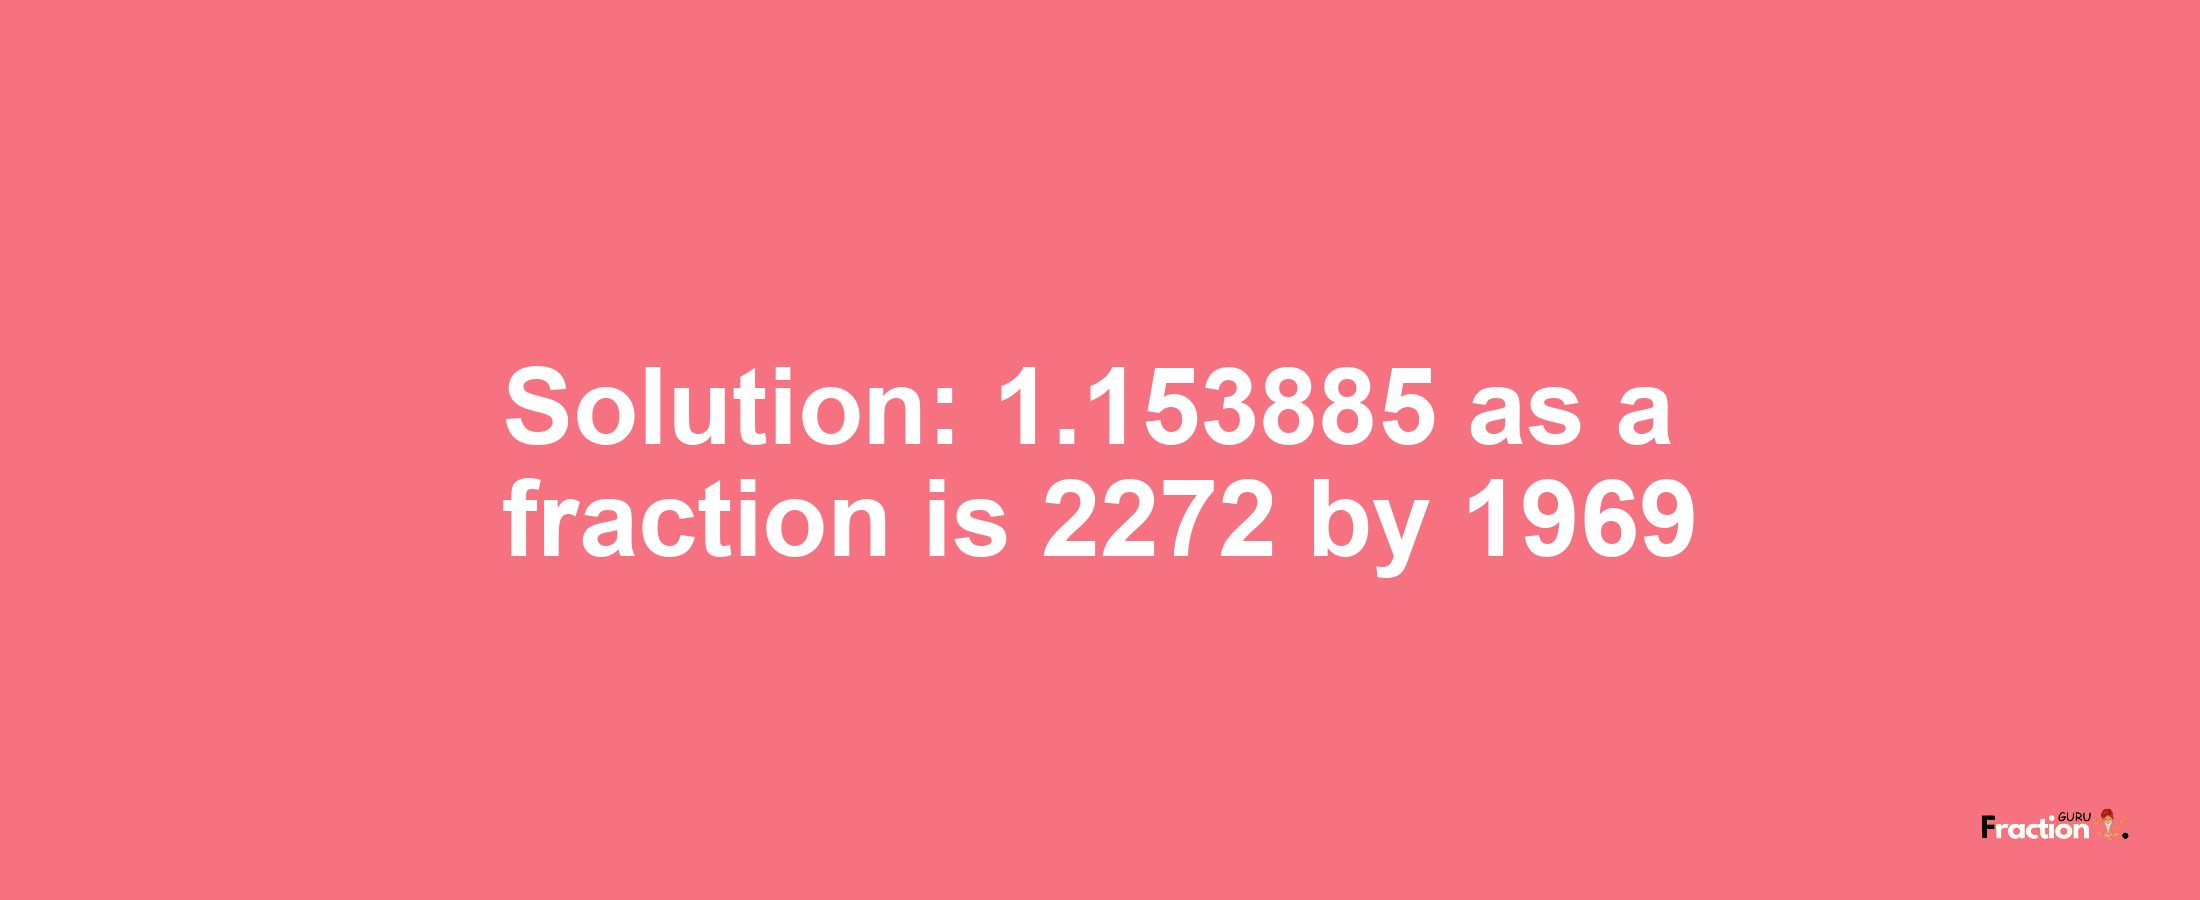 Solution:1.153885 as a fraction is 2272/1969